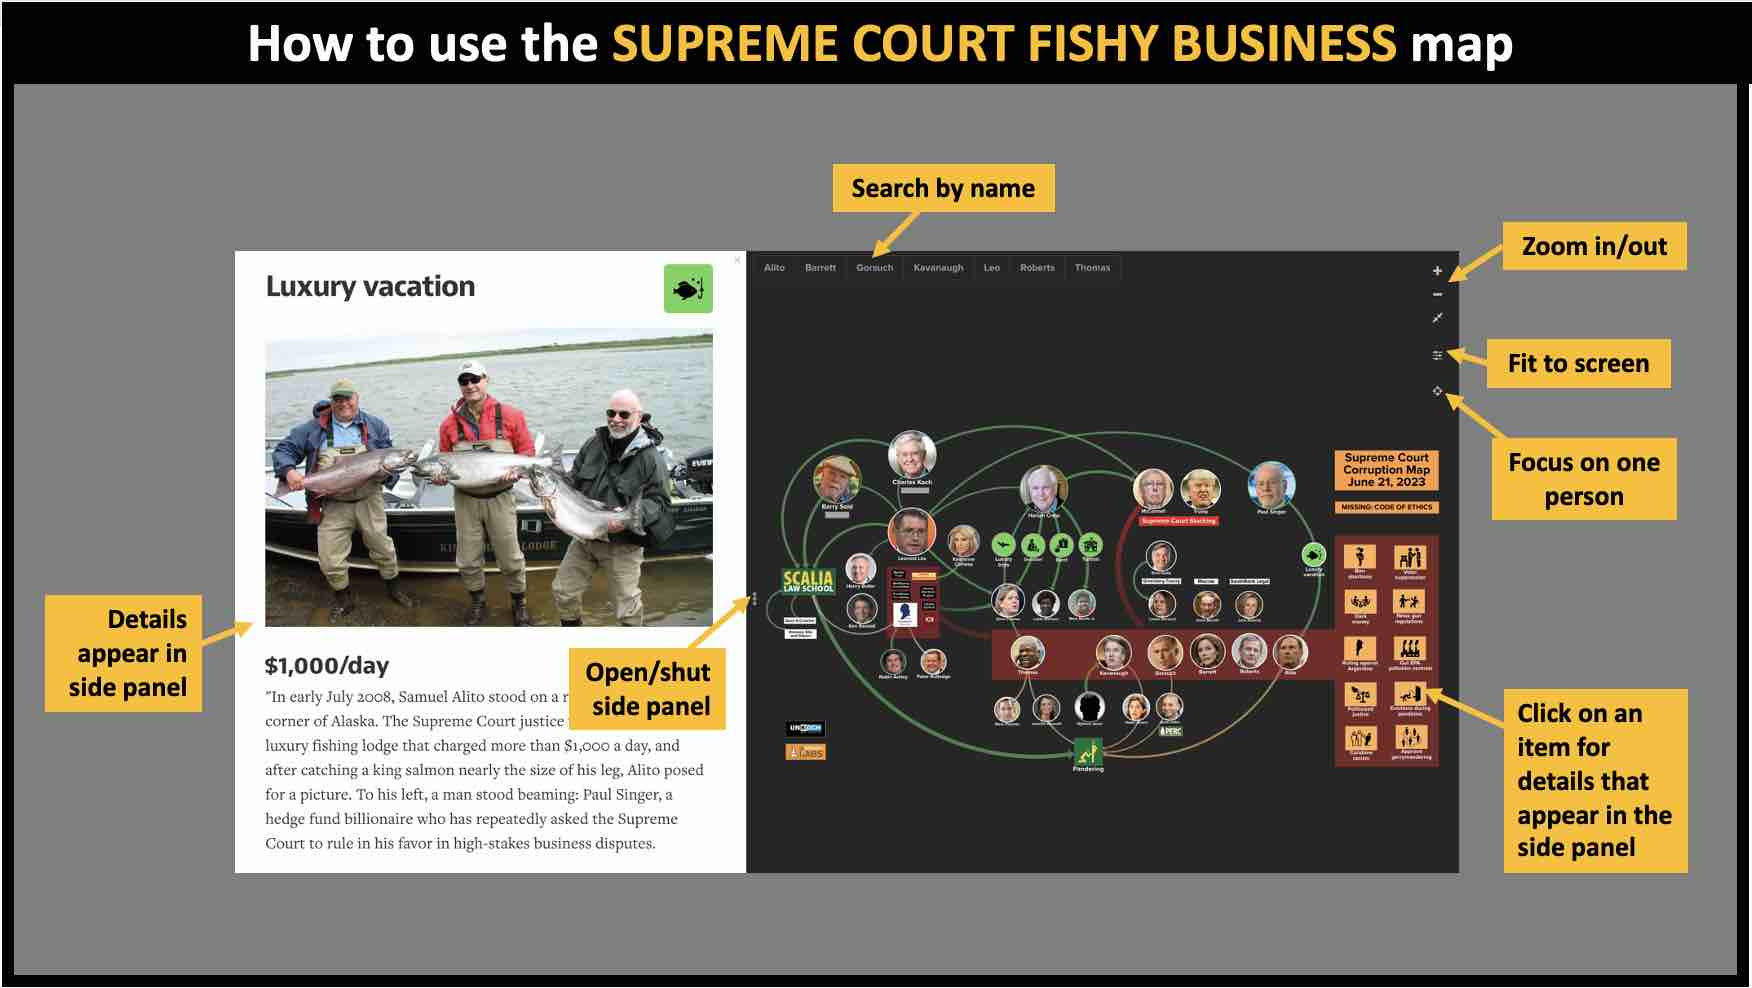 Follow the money and favors behind the Supreme Court fishy business